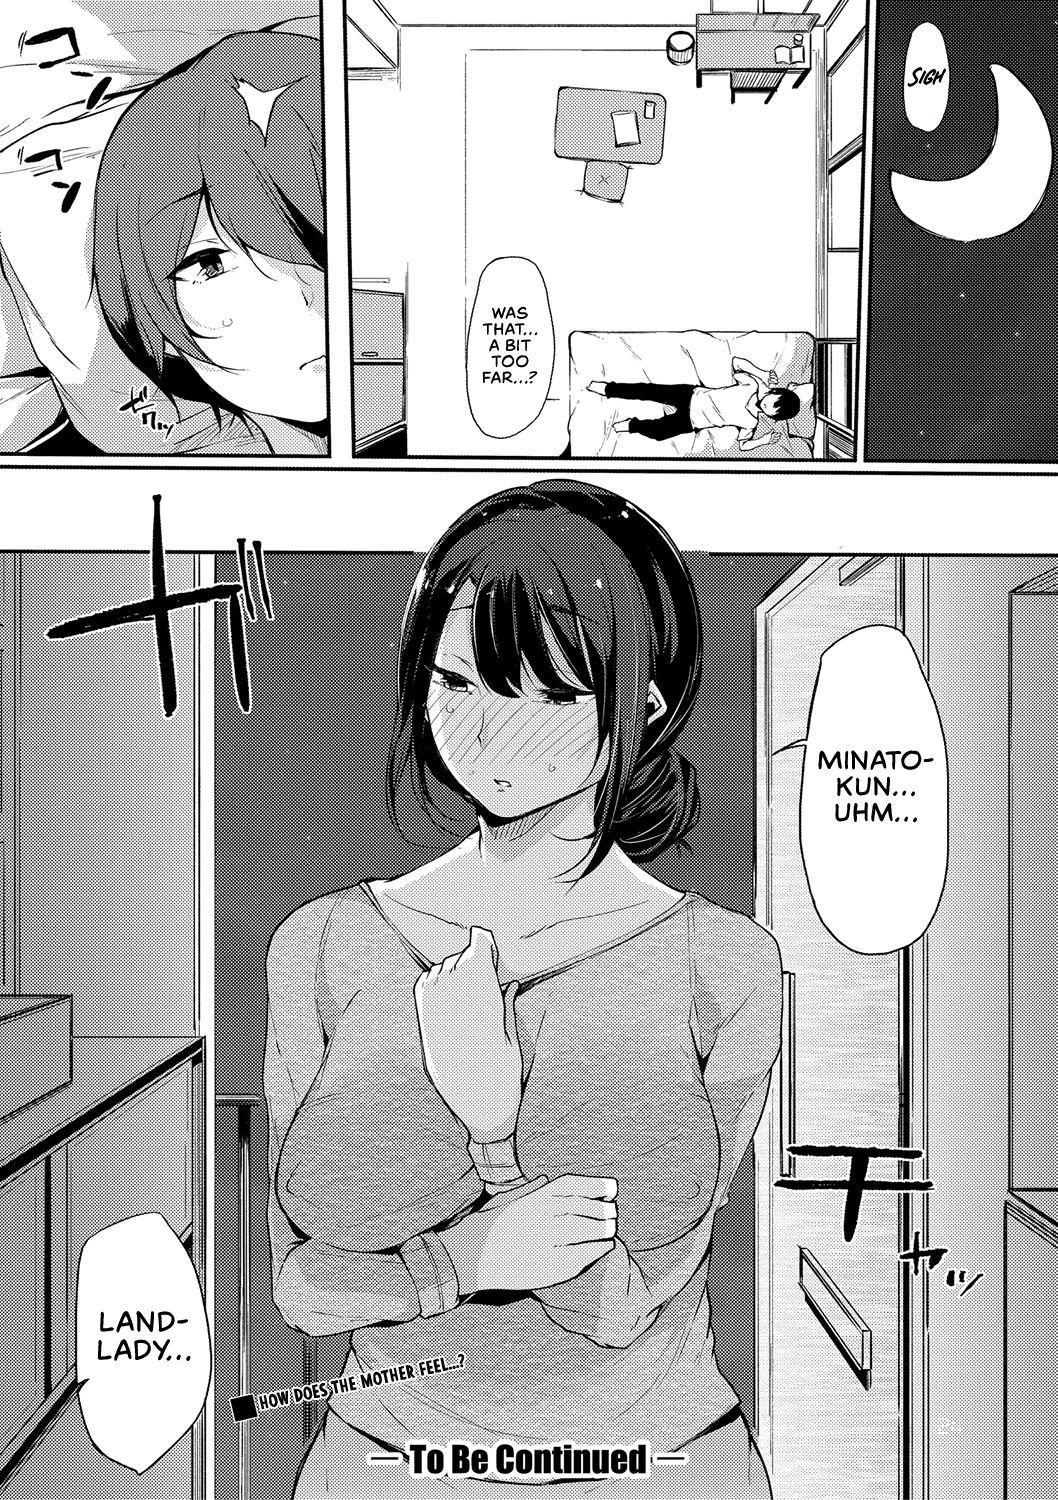 Bigdick Musume Nochi Haha, Tokoroniyori Shunrai Zenpen | A Daughter followed by a Mother: A spring Full of Thunders. Livesex - Page 24